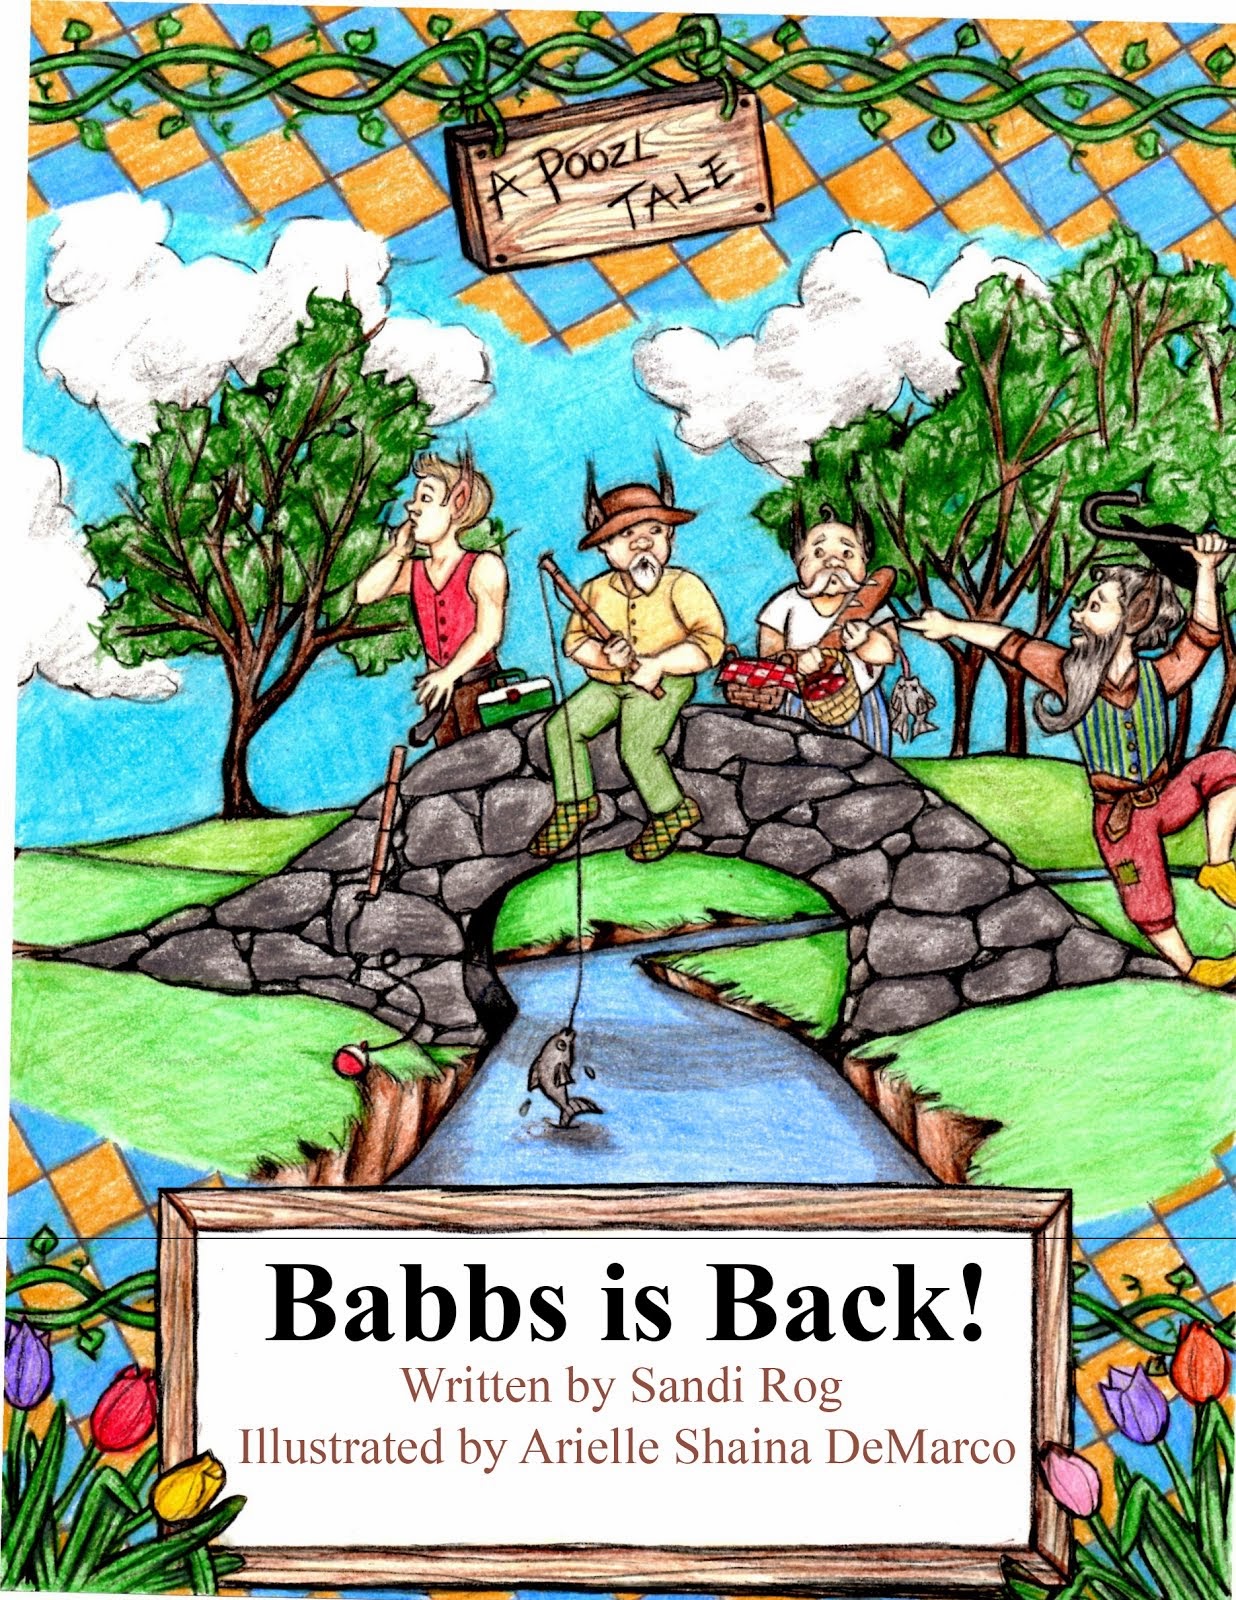 Babbs is Back